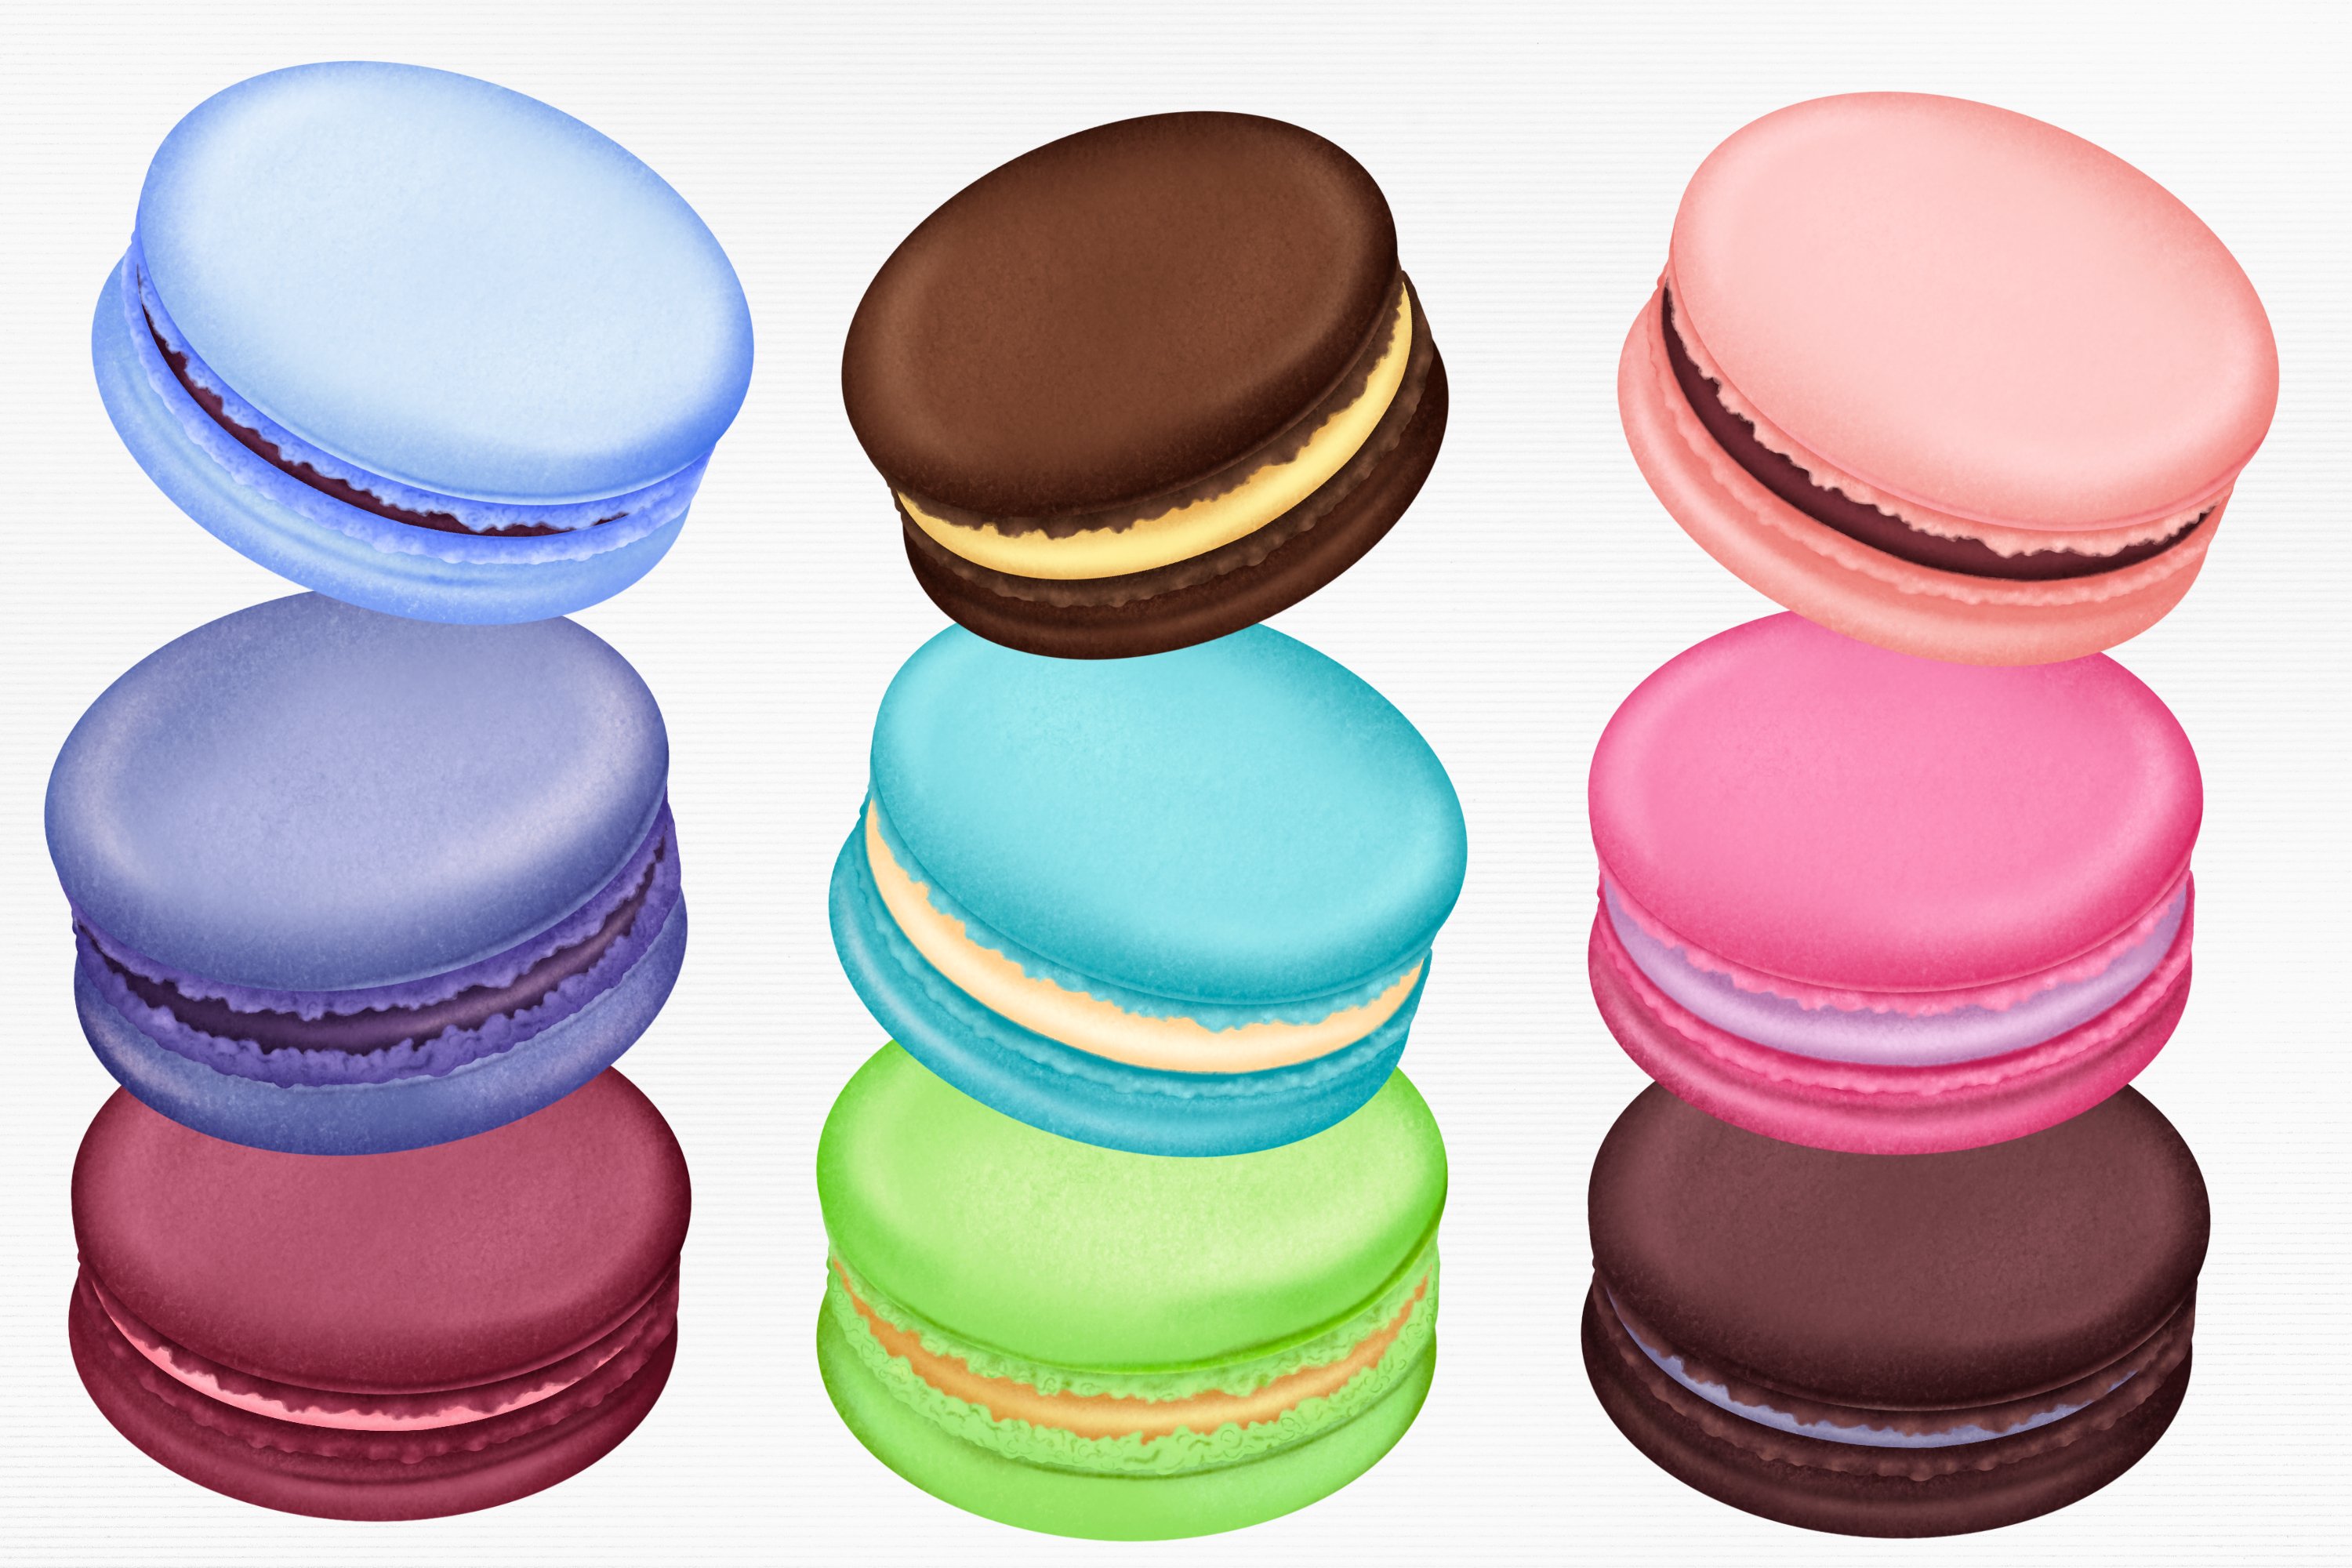 Multicolor macaroons for different projects.